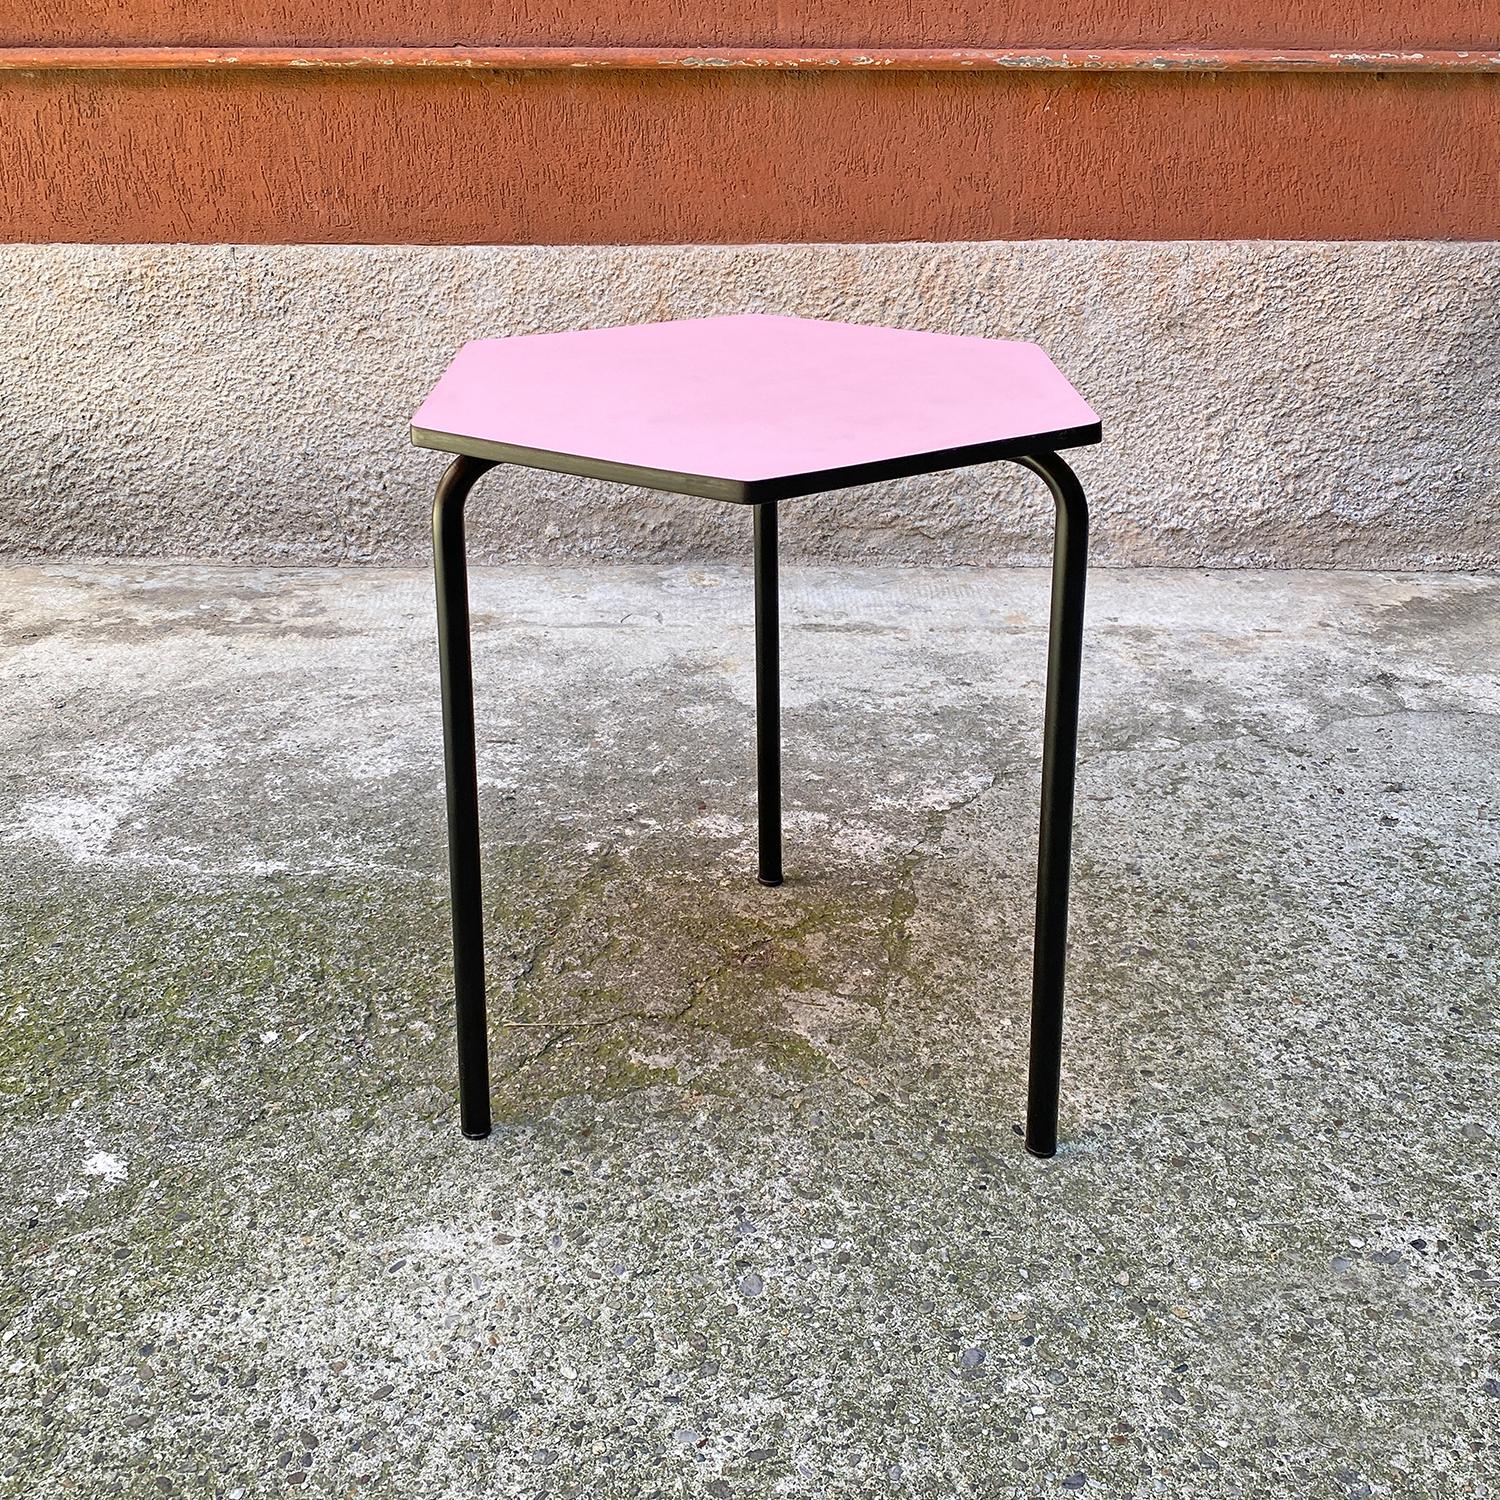 Italian Mid-Century Modern pink formica hexagonal bar tables, 1960s
Set of four hexagonal bar tables, with pink formica top, black border and metal tubular legs.

Perfect condition because completely restored, with new ant.

Available 4 pieces